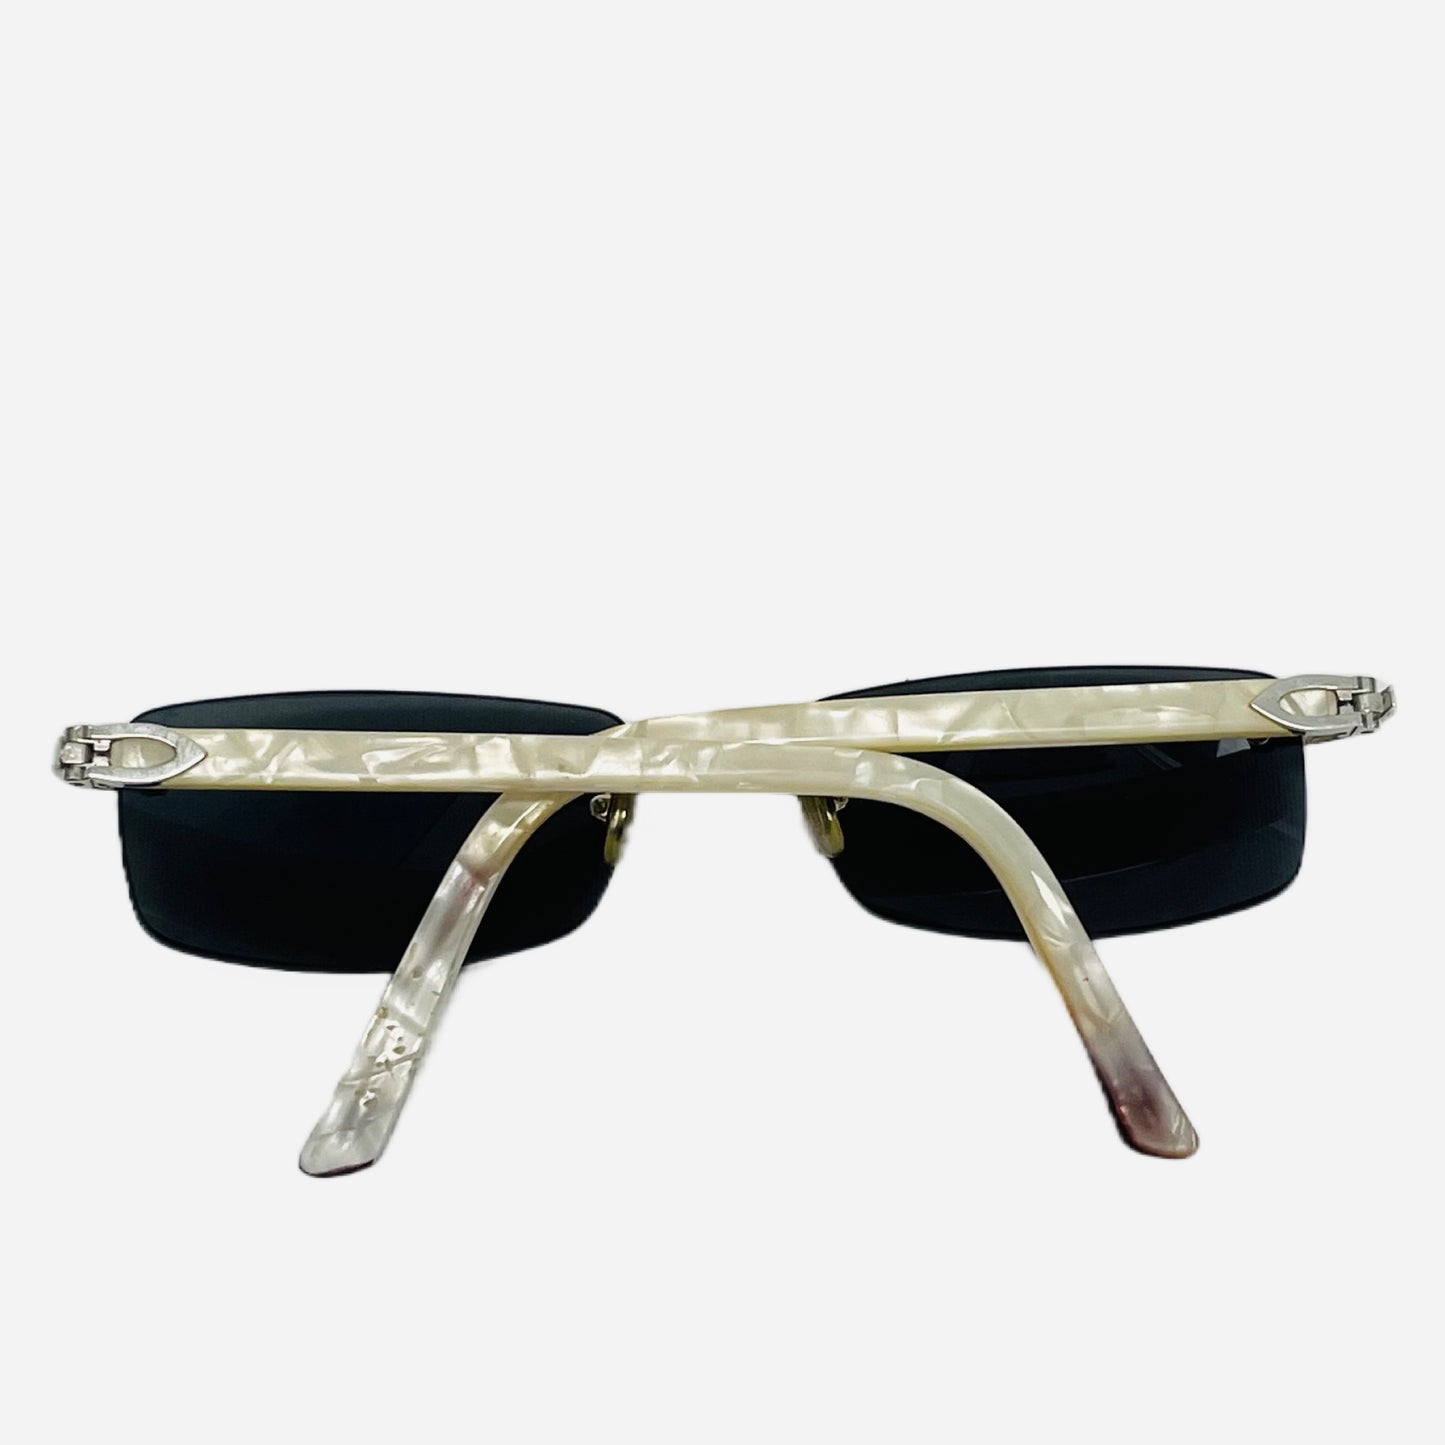 Vintage-Cartier-C-Decor-Rimless-Mother-of-Pearl-Platinum-Sonnenbrille-Sunglasses-the-seekers-back